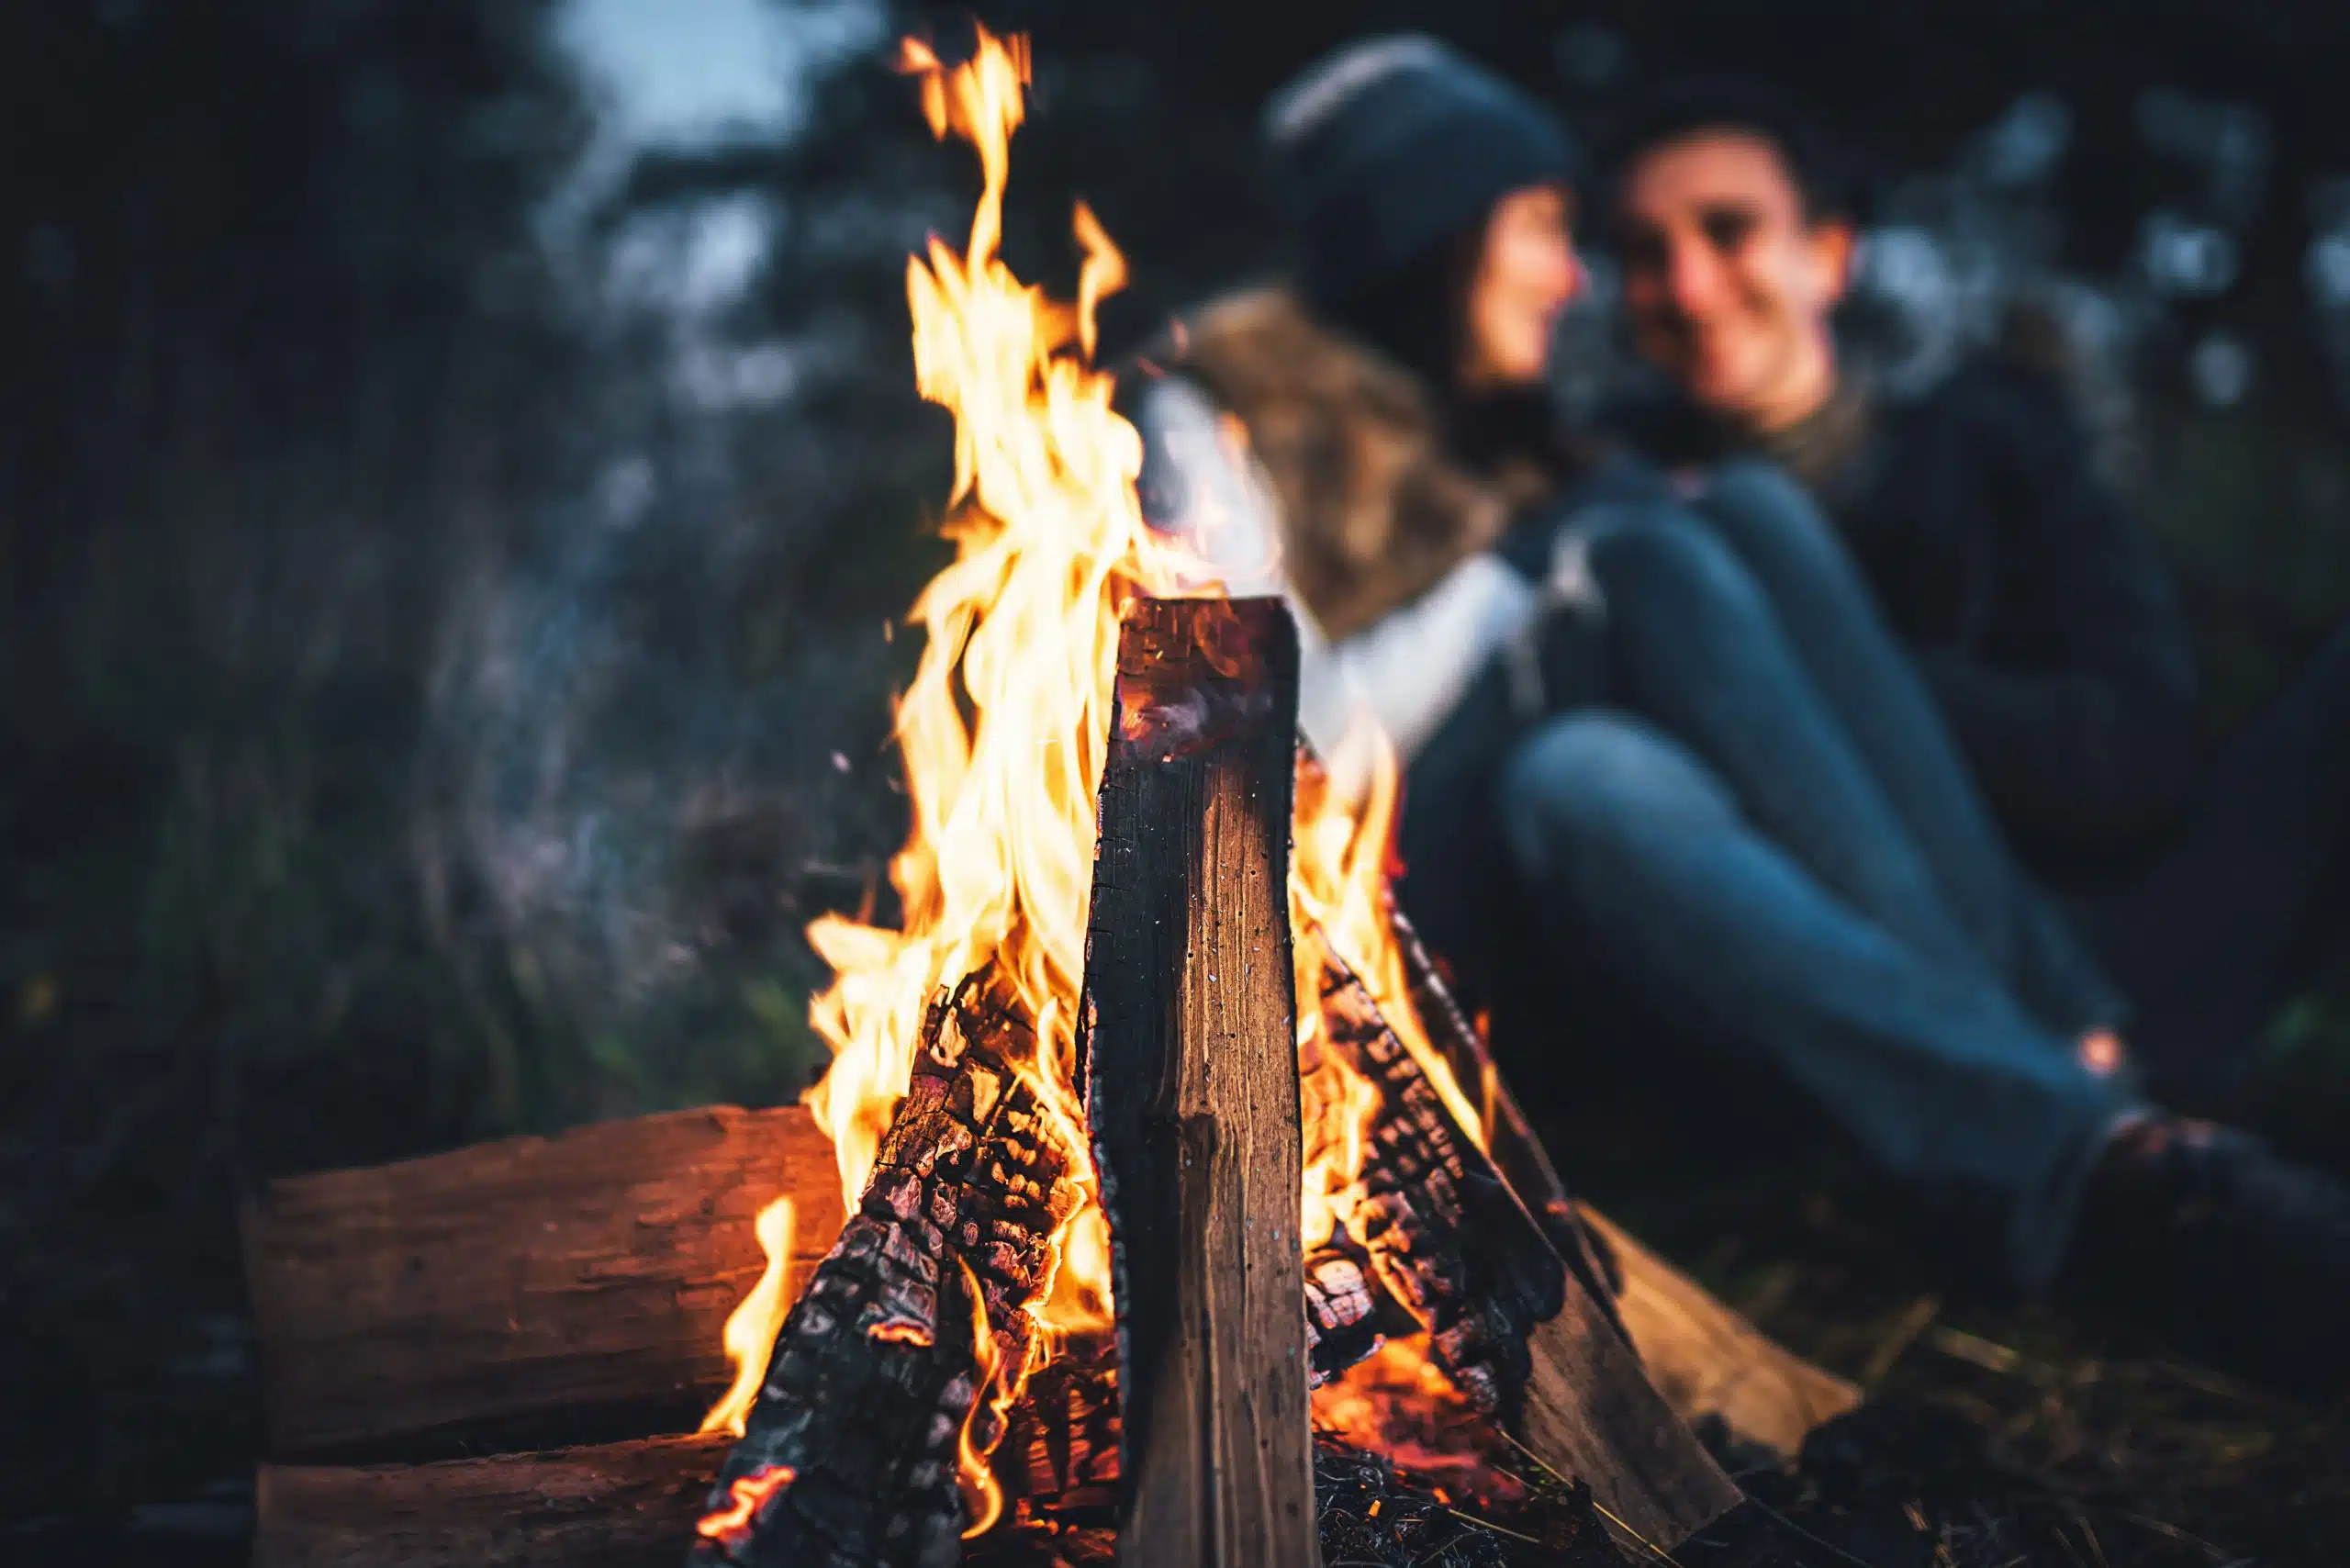 Couple relaxing near bonfire in the forest at night